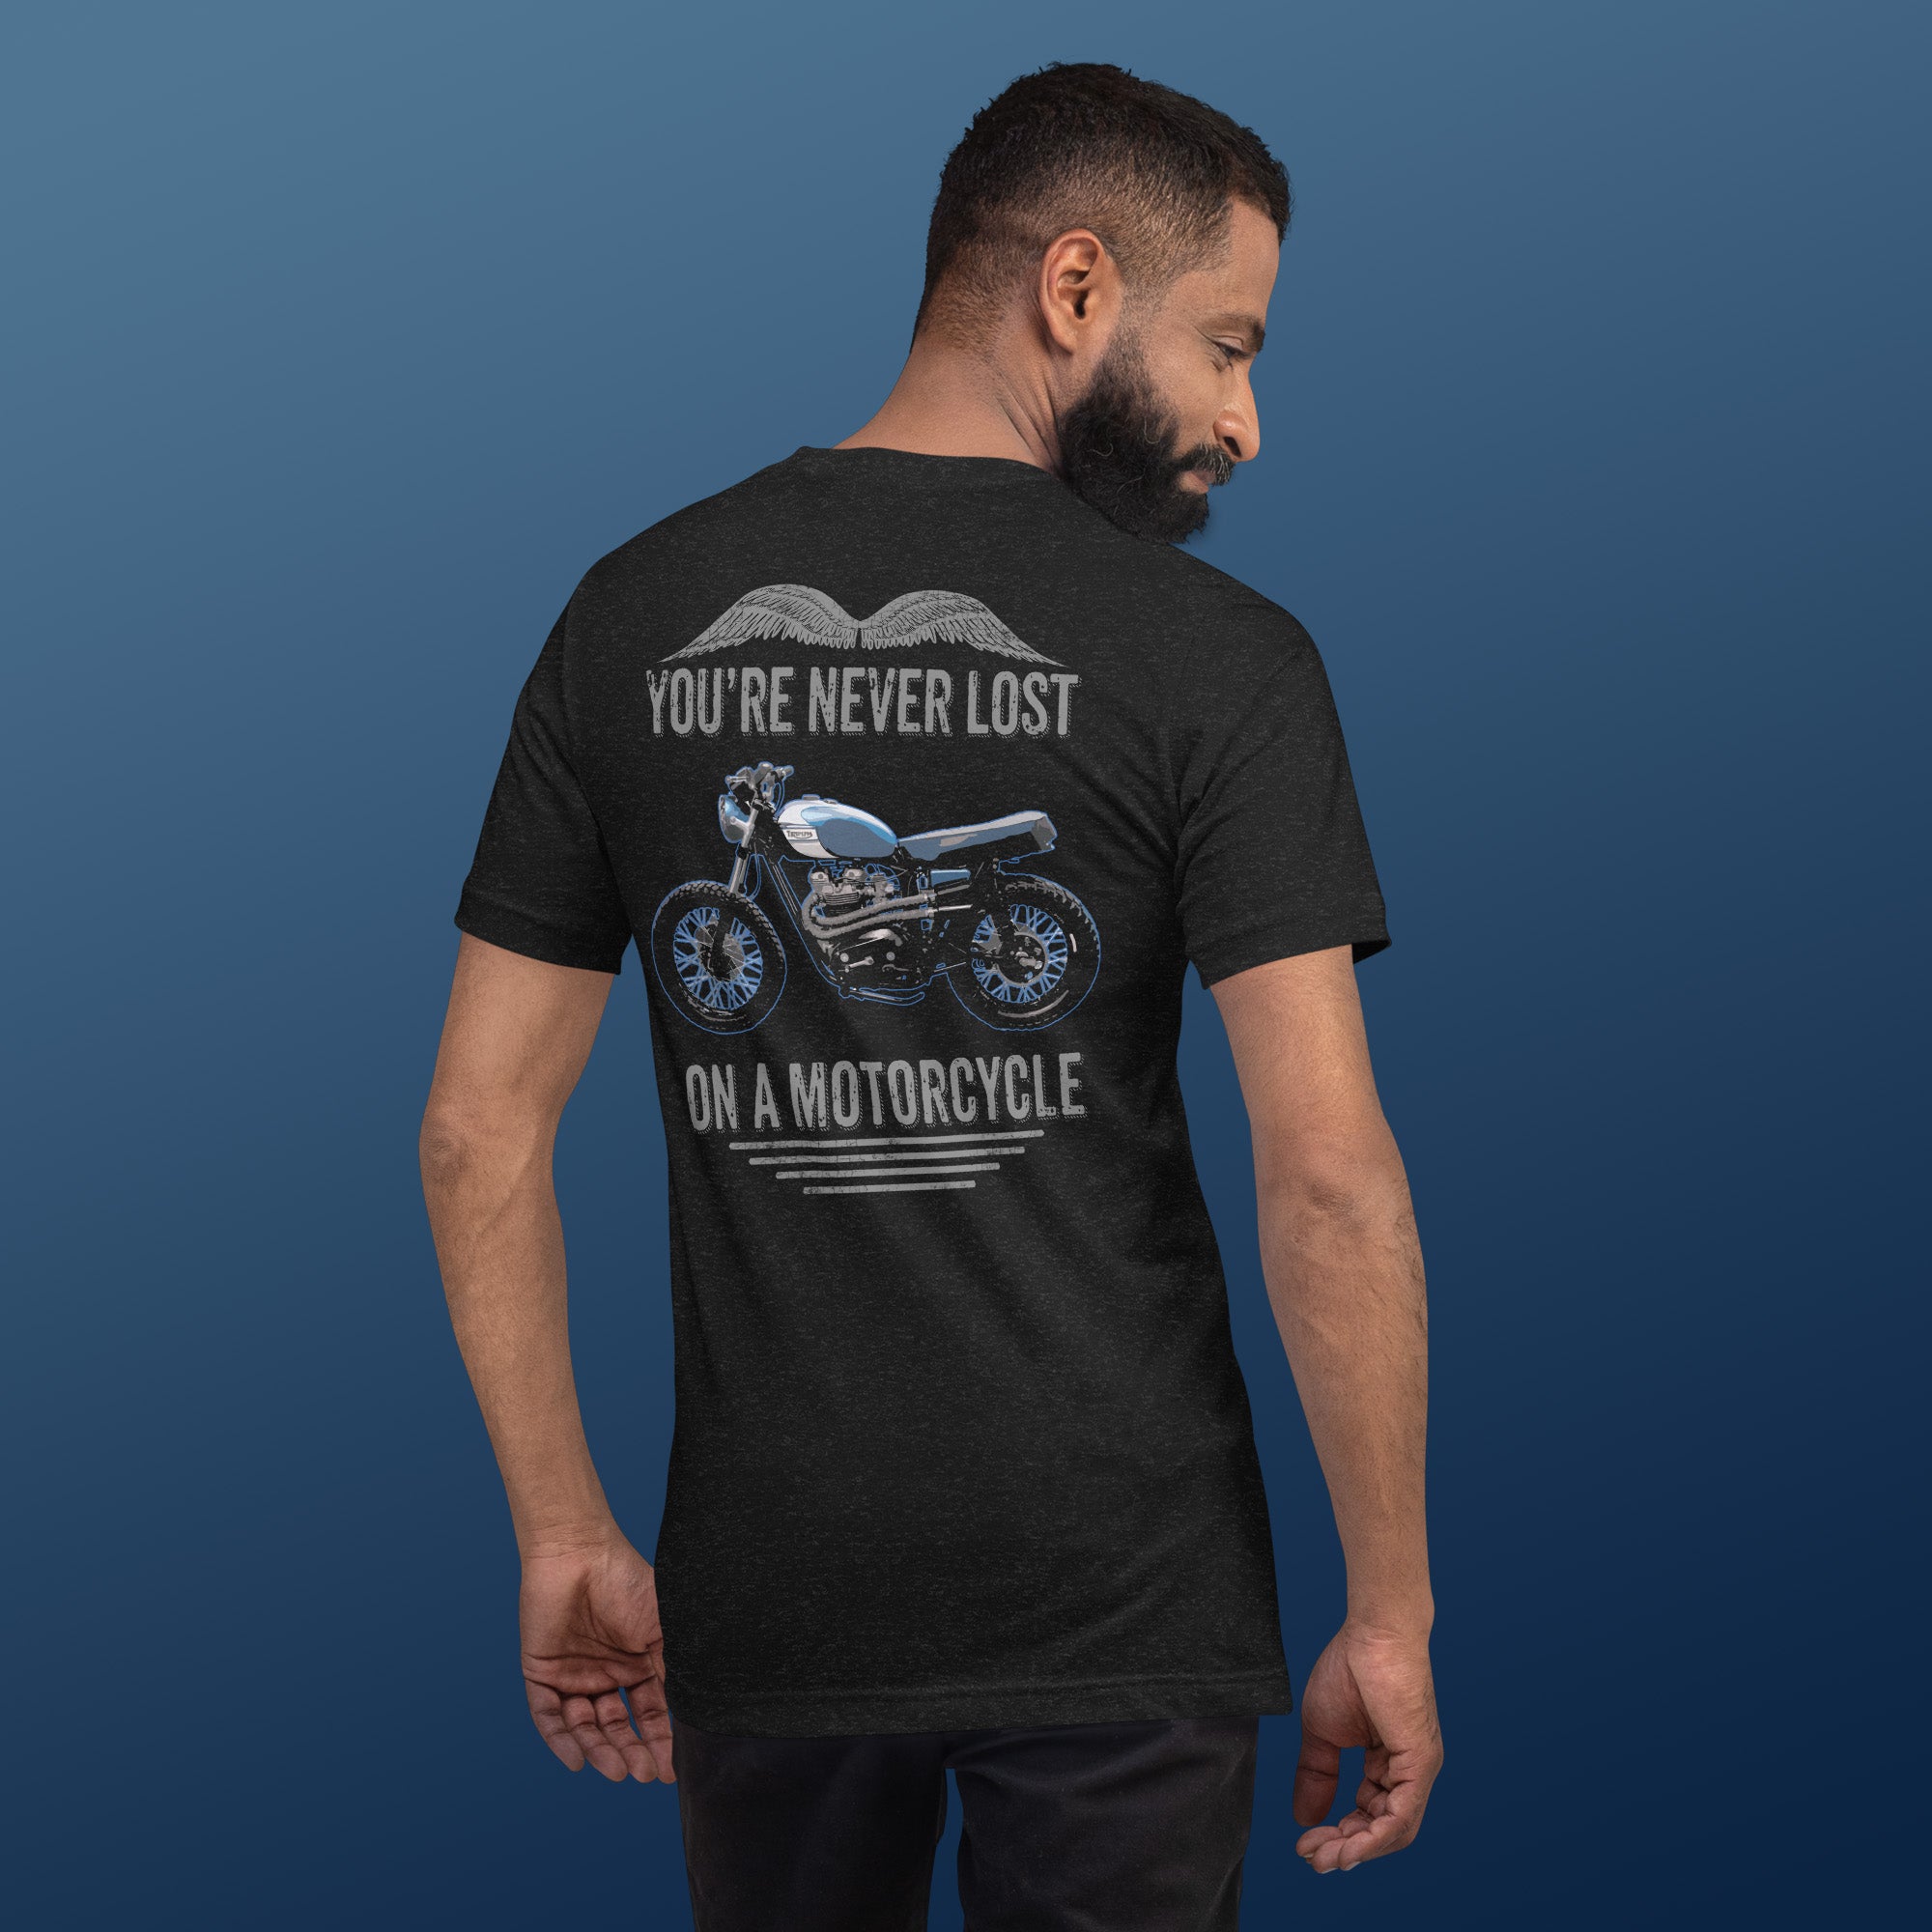 You're Never Lost On A Motorcycle T-shirt